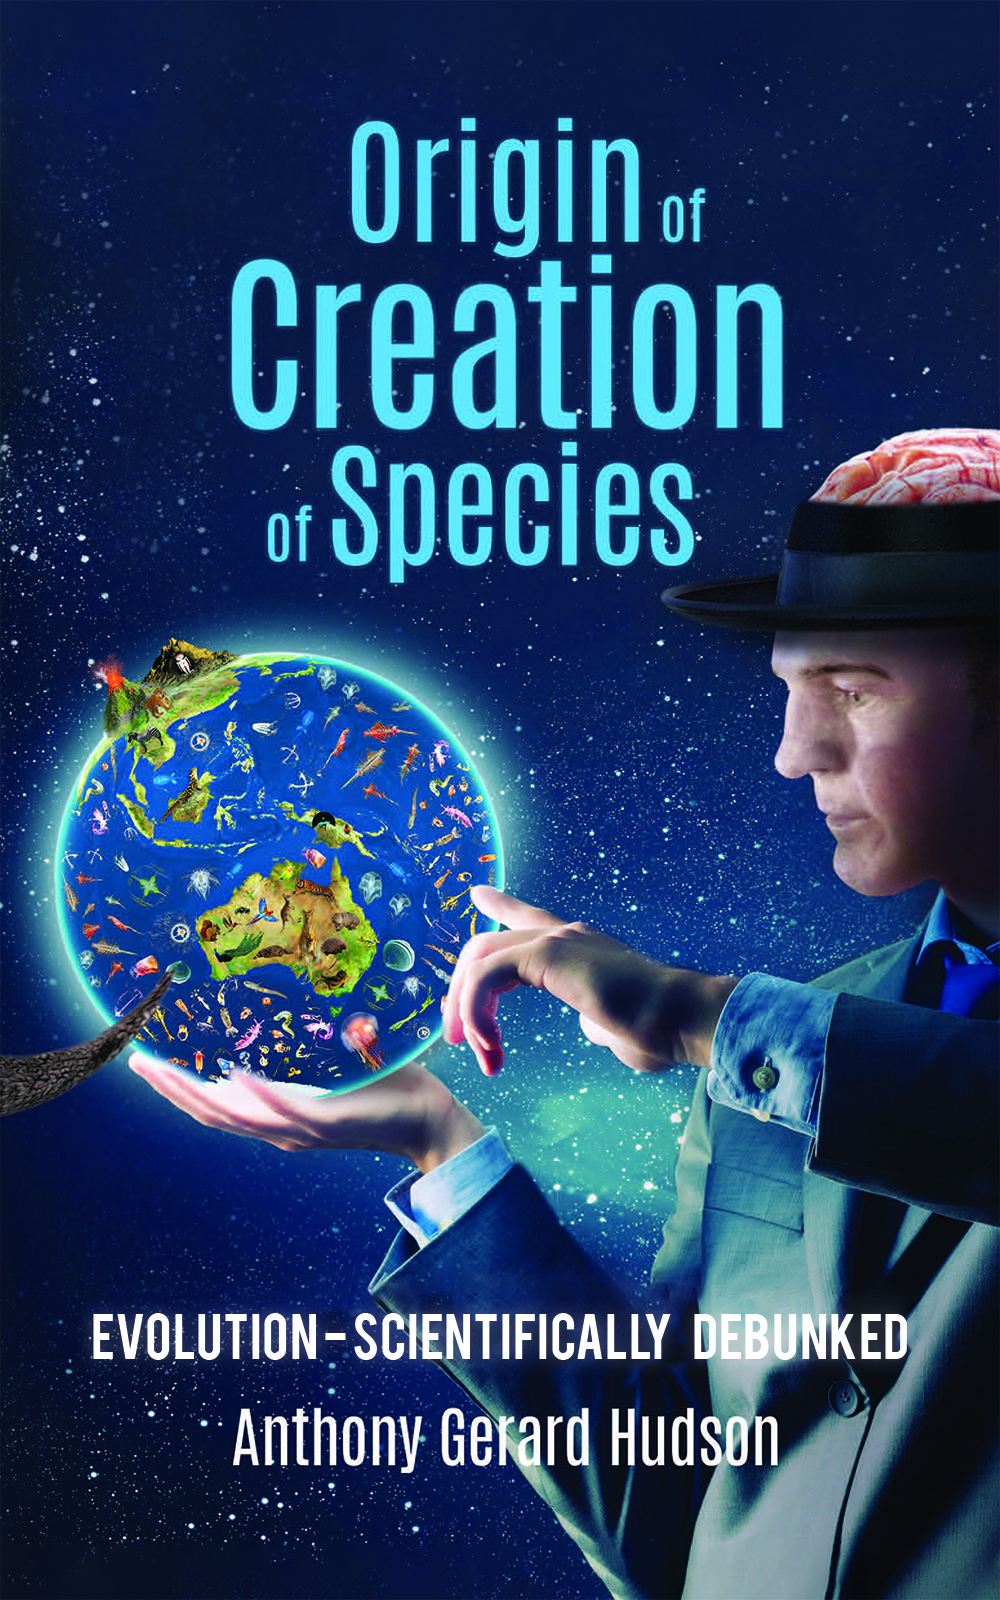 This image is the cover for the book Origin of Creation of Species